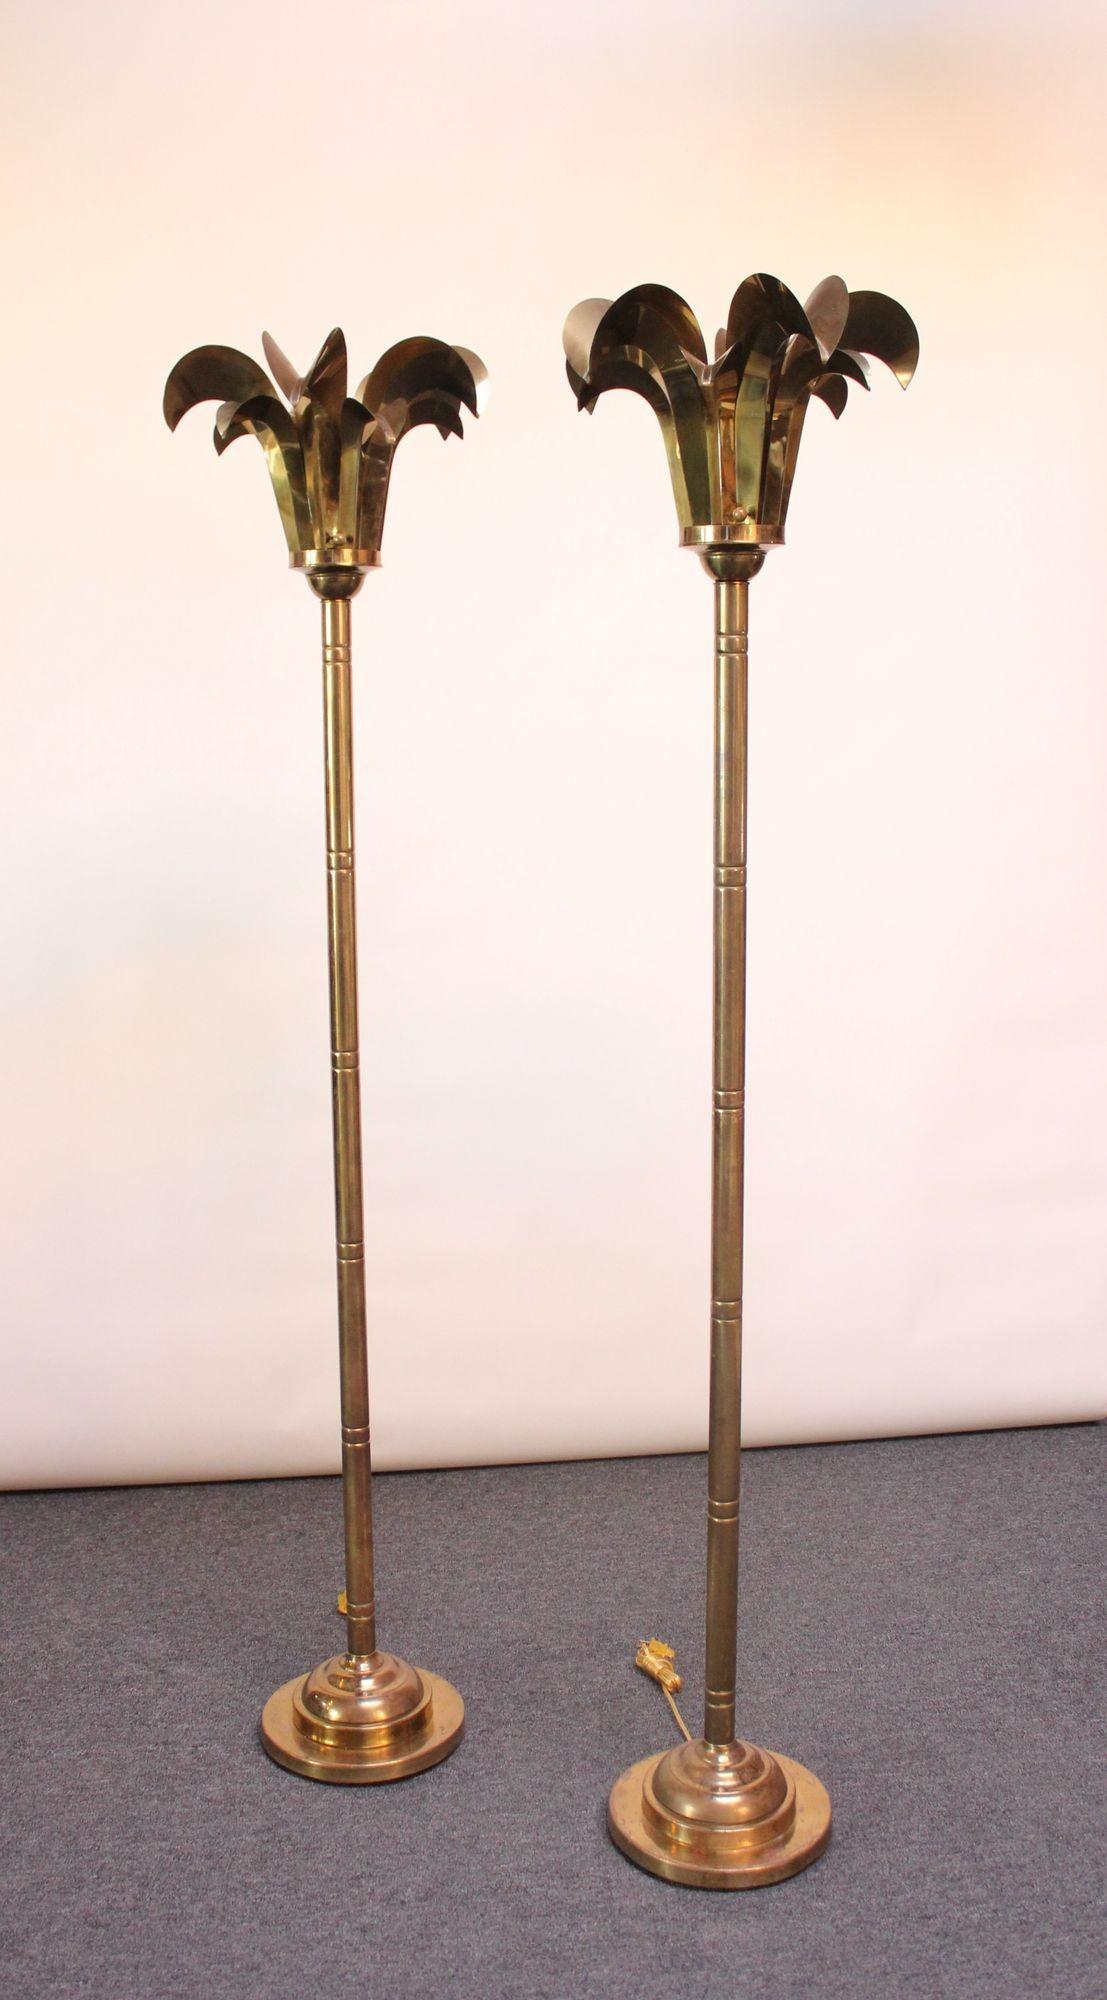 Pair of Hollywood Regency-style brass floor lamps fashioned after palm trees manufactured by Hart Associates (ca. 1970, USA).
Solid, unpolished brass with rich patina/wear, as shown.
Elegant statement pieces exhibiting superior craftsmanship and